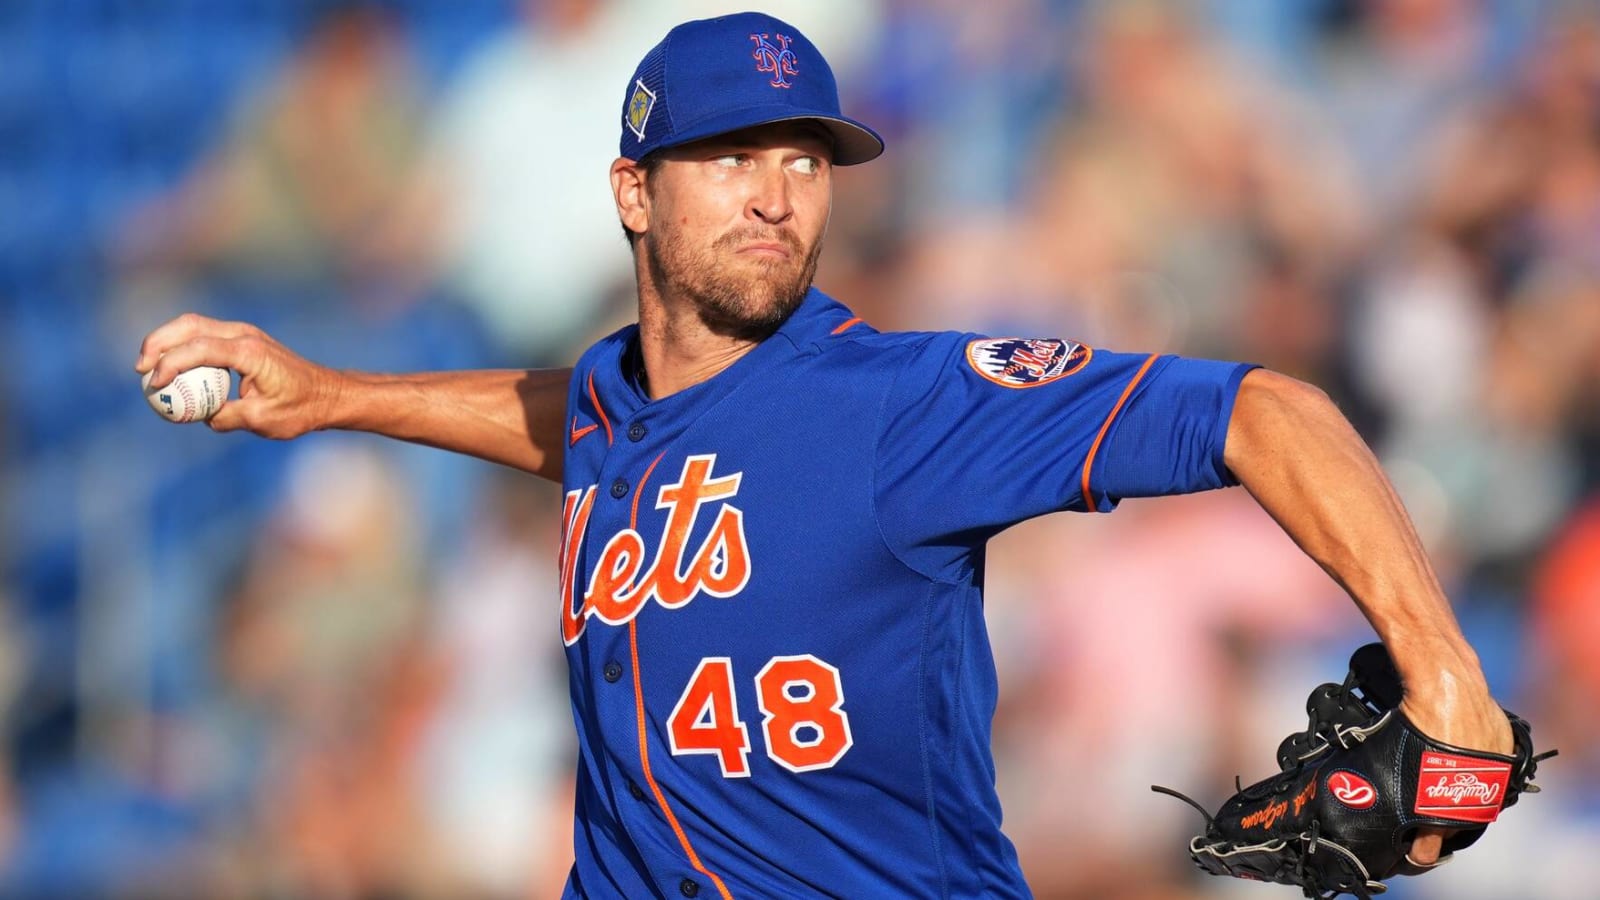 Jacob deGrom leaves game early with right shoulder soreness - Amazin' Avenue